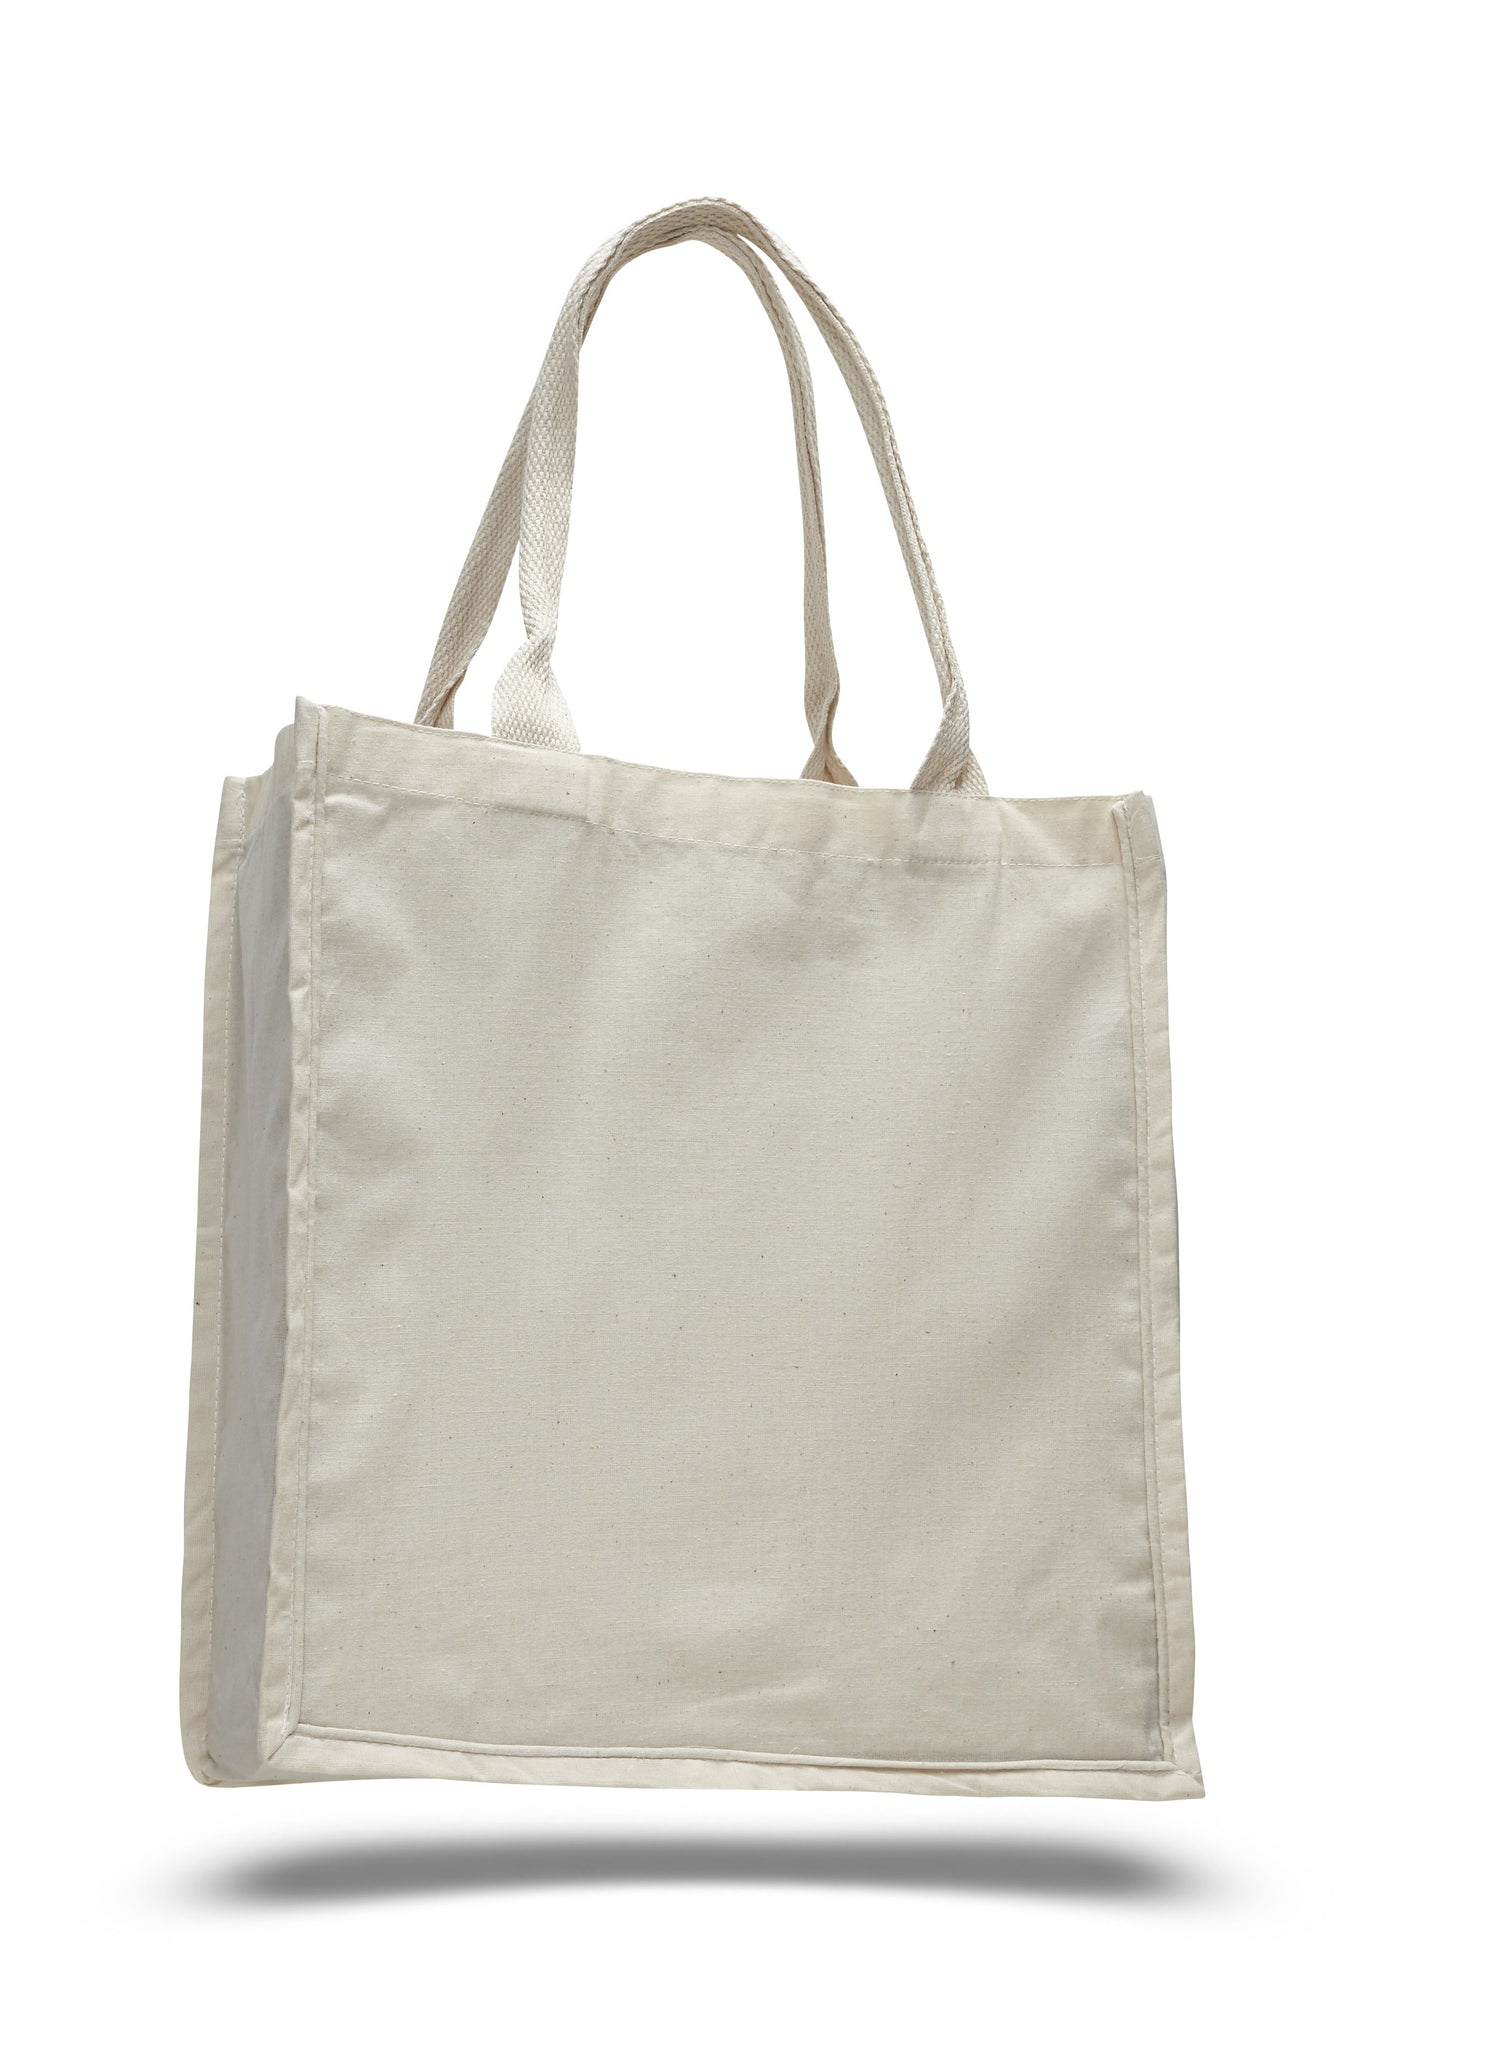 Fancy Canvas Tote Bags